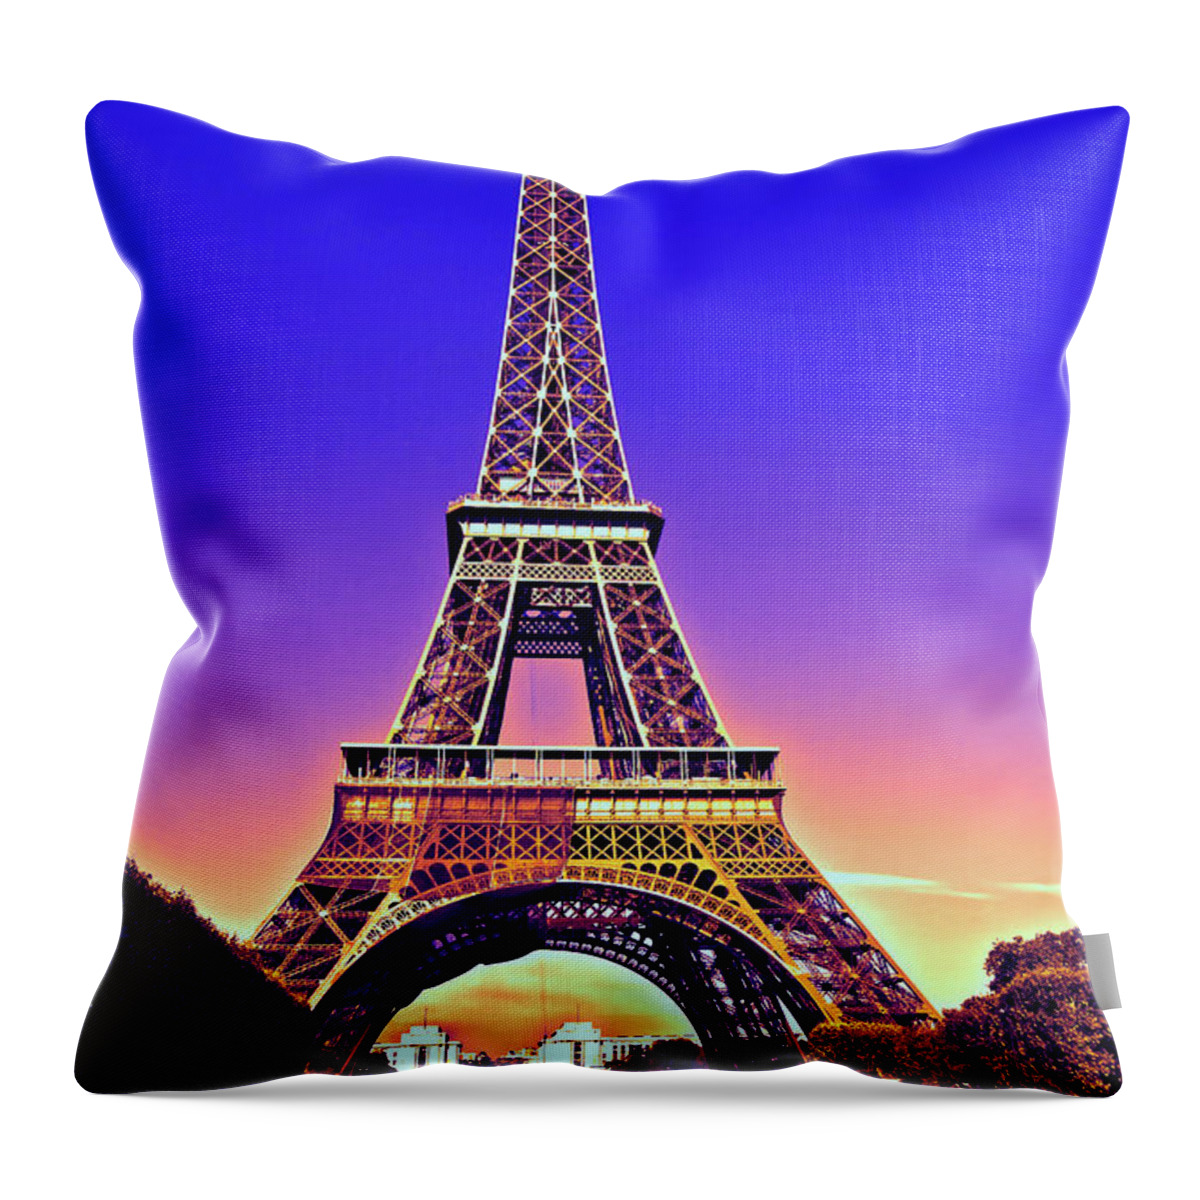 Eiffel Tower Throw Pillow featuring the photograph Eiffel Tower #2 by Charuhas Images